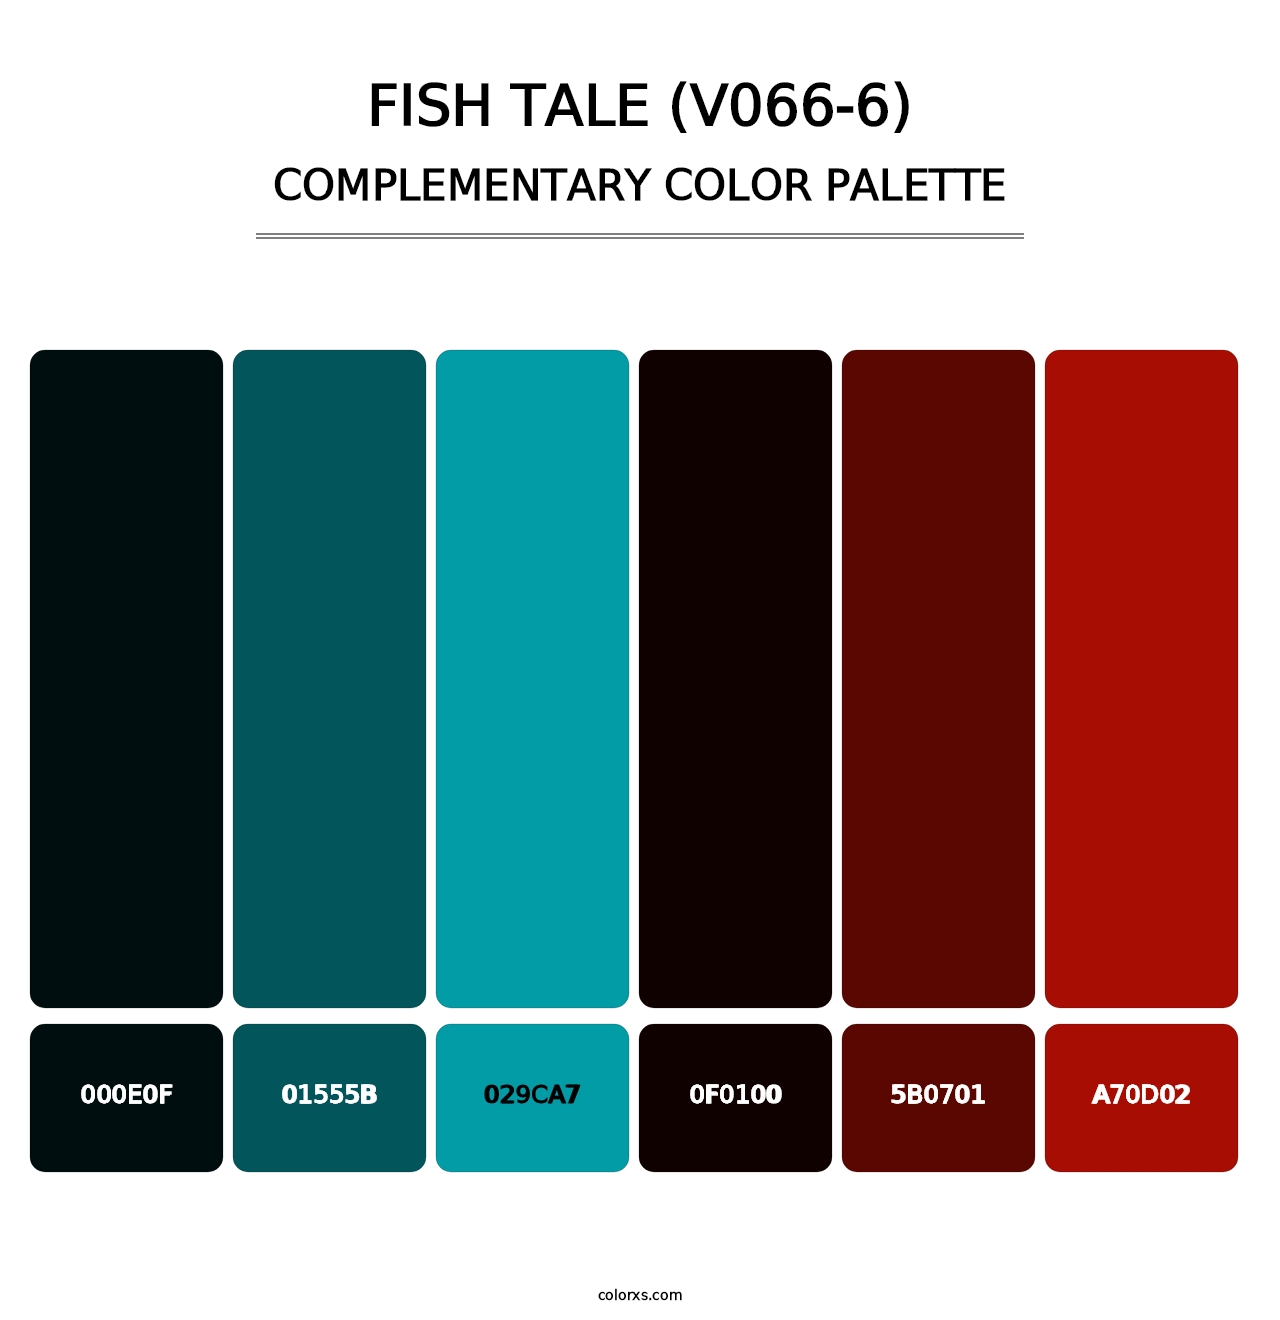 Fish Tale (V066-6) - Complementary Color Palette